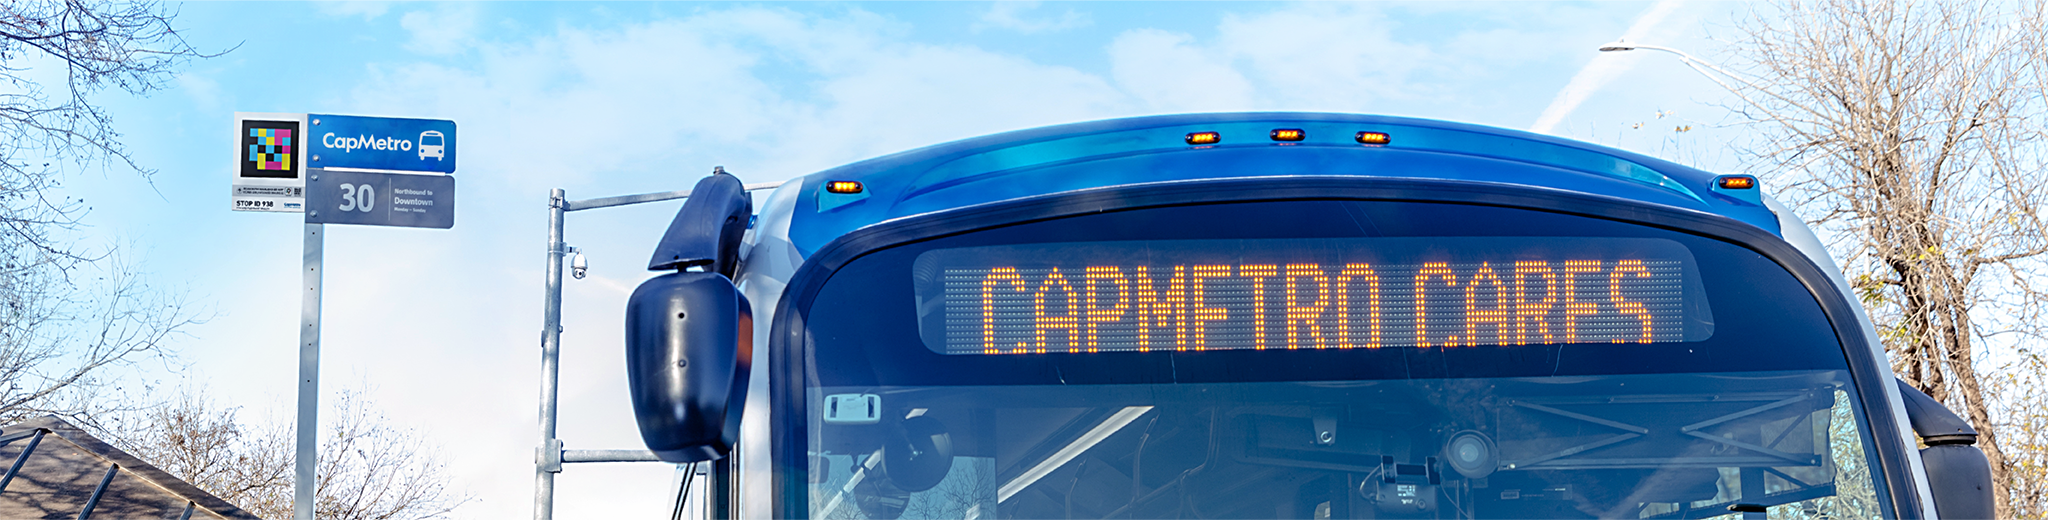 Photograph of a CapMetro bus sitting next to a bus stop sign with a NaviLens code on it.